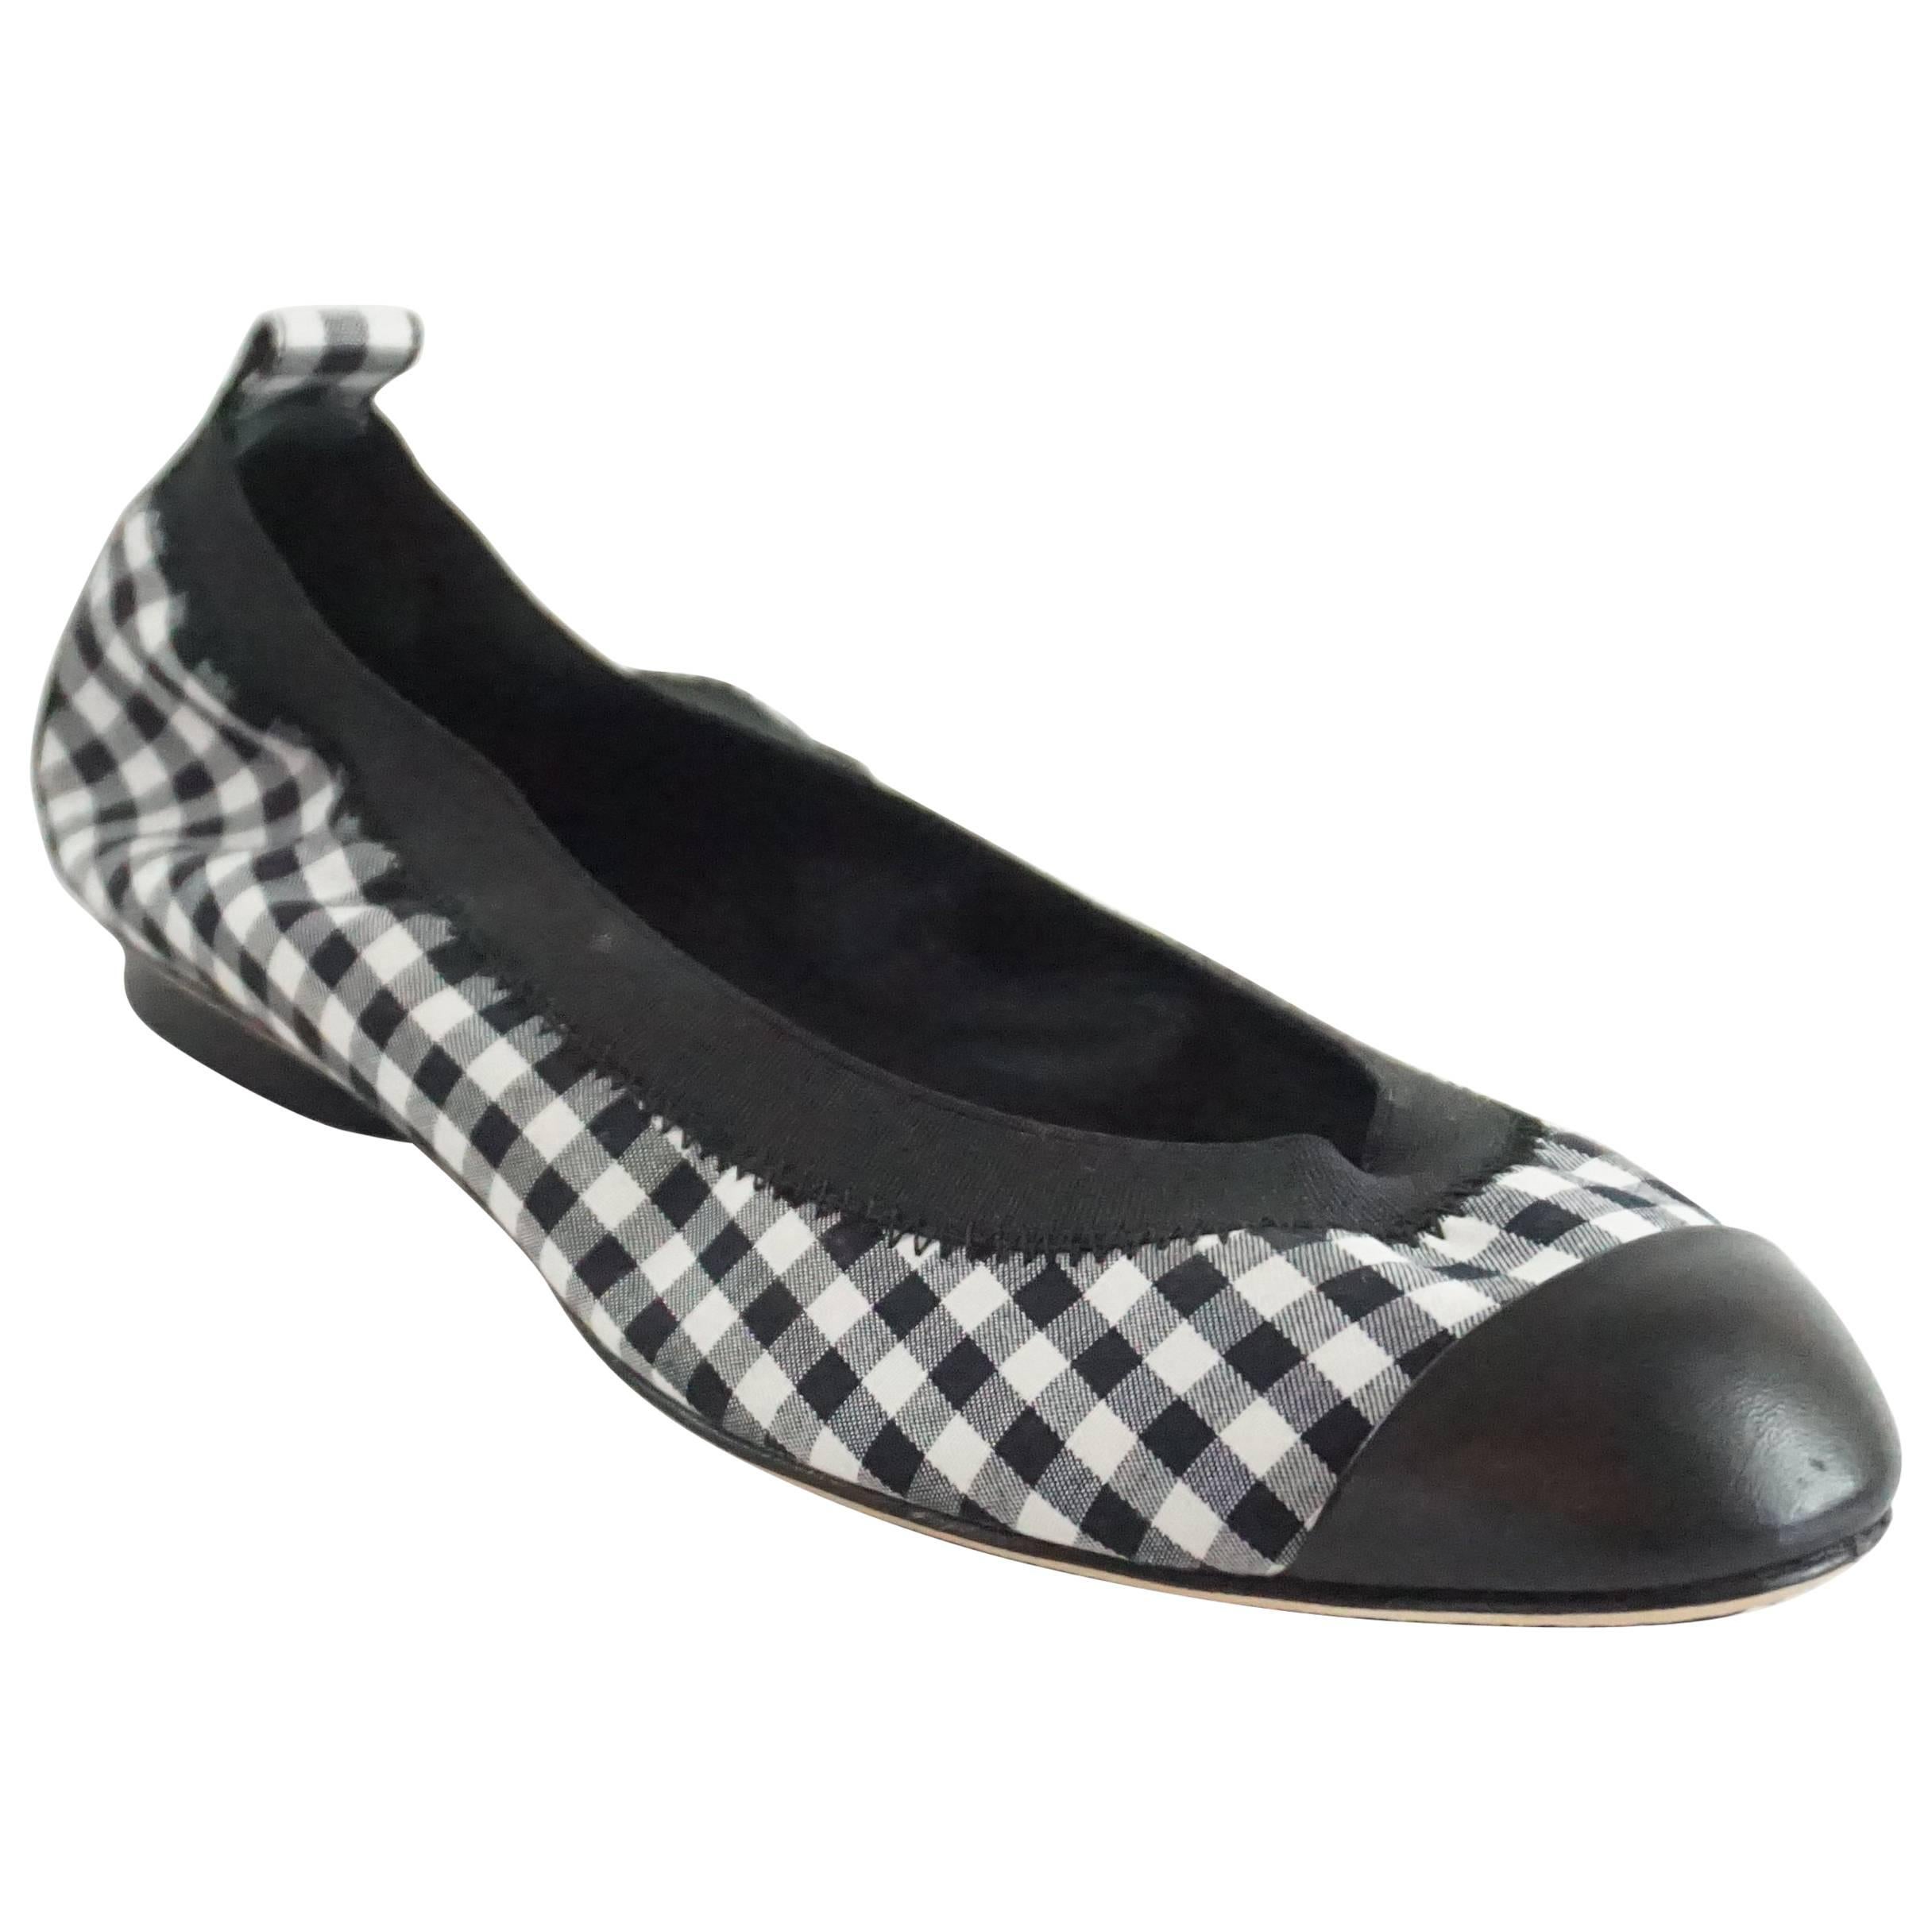 Chanel Black and White Gingham Cap Toe Flats - 38